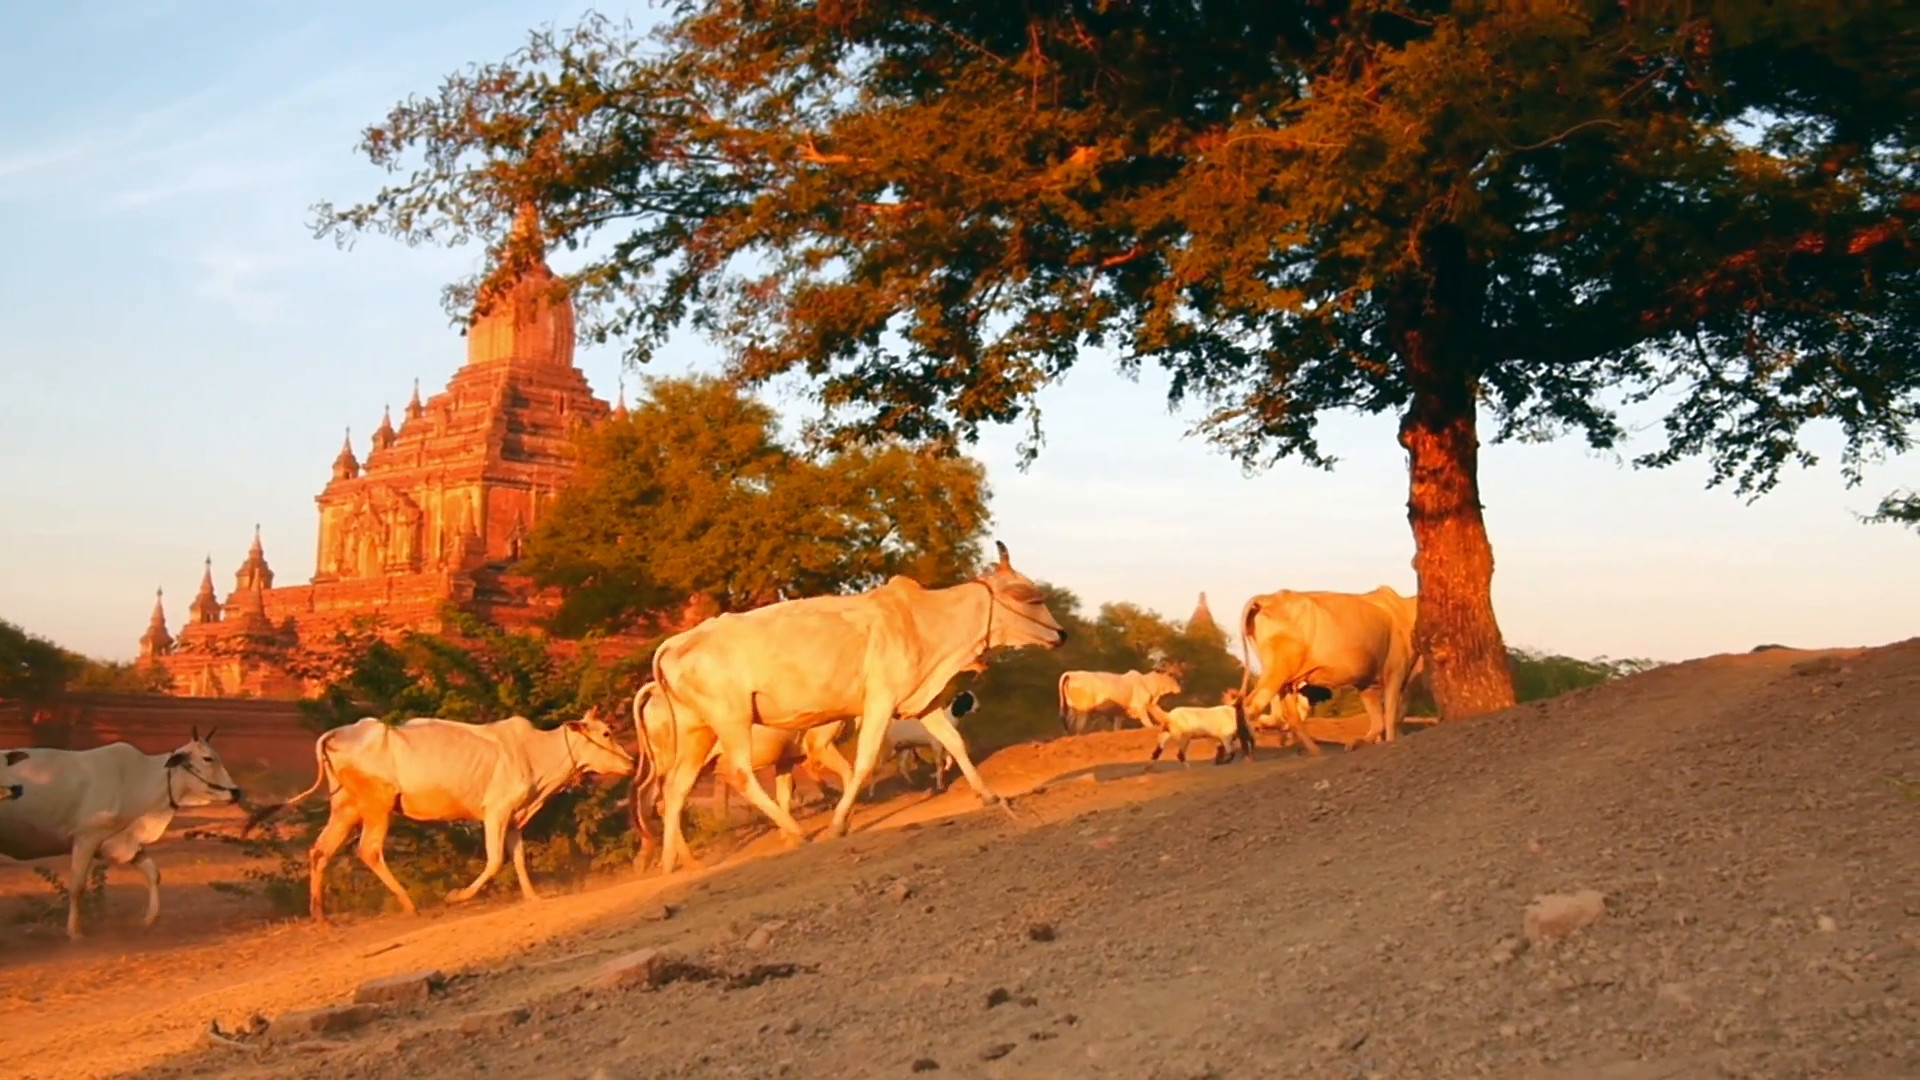 1920x1080 Bagan, Myanmar - Beautiful travel landscape of historical Buddhist site.  Running livestock animals on country road and ancient temple on background  Stock ...